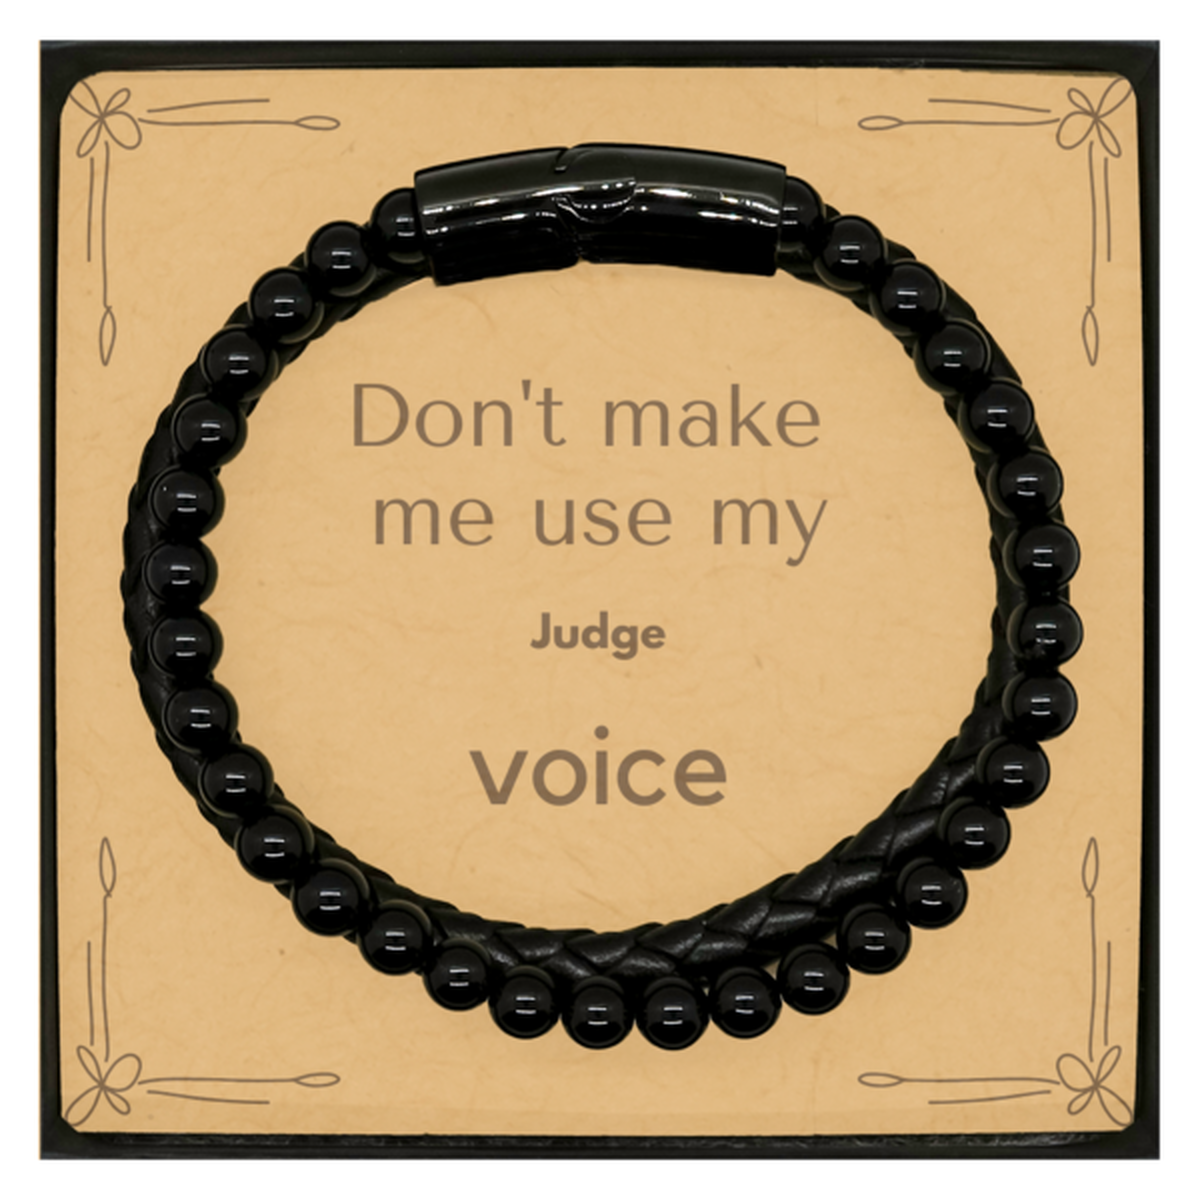 Don't make me use my Judge voice, Sarcasm Judge Card Gifts, Christmas Judge Stone Leather Bracelets Birthday Unique Gifts For Judge Coworkers, Men, Women, Colleague, Friends